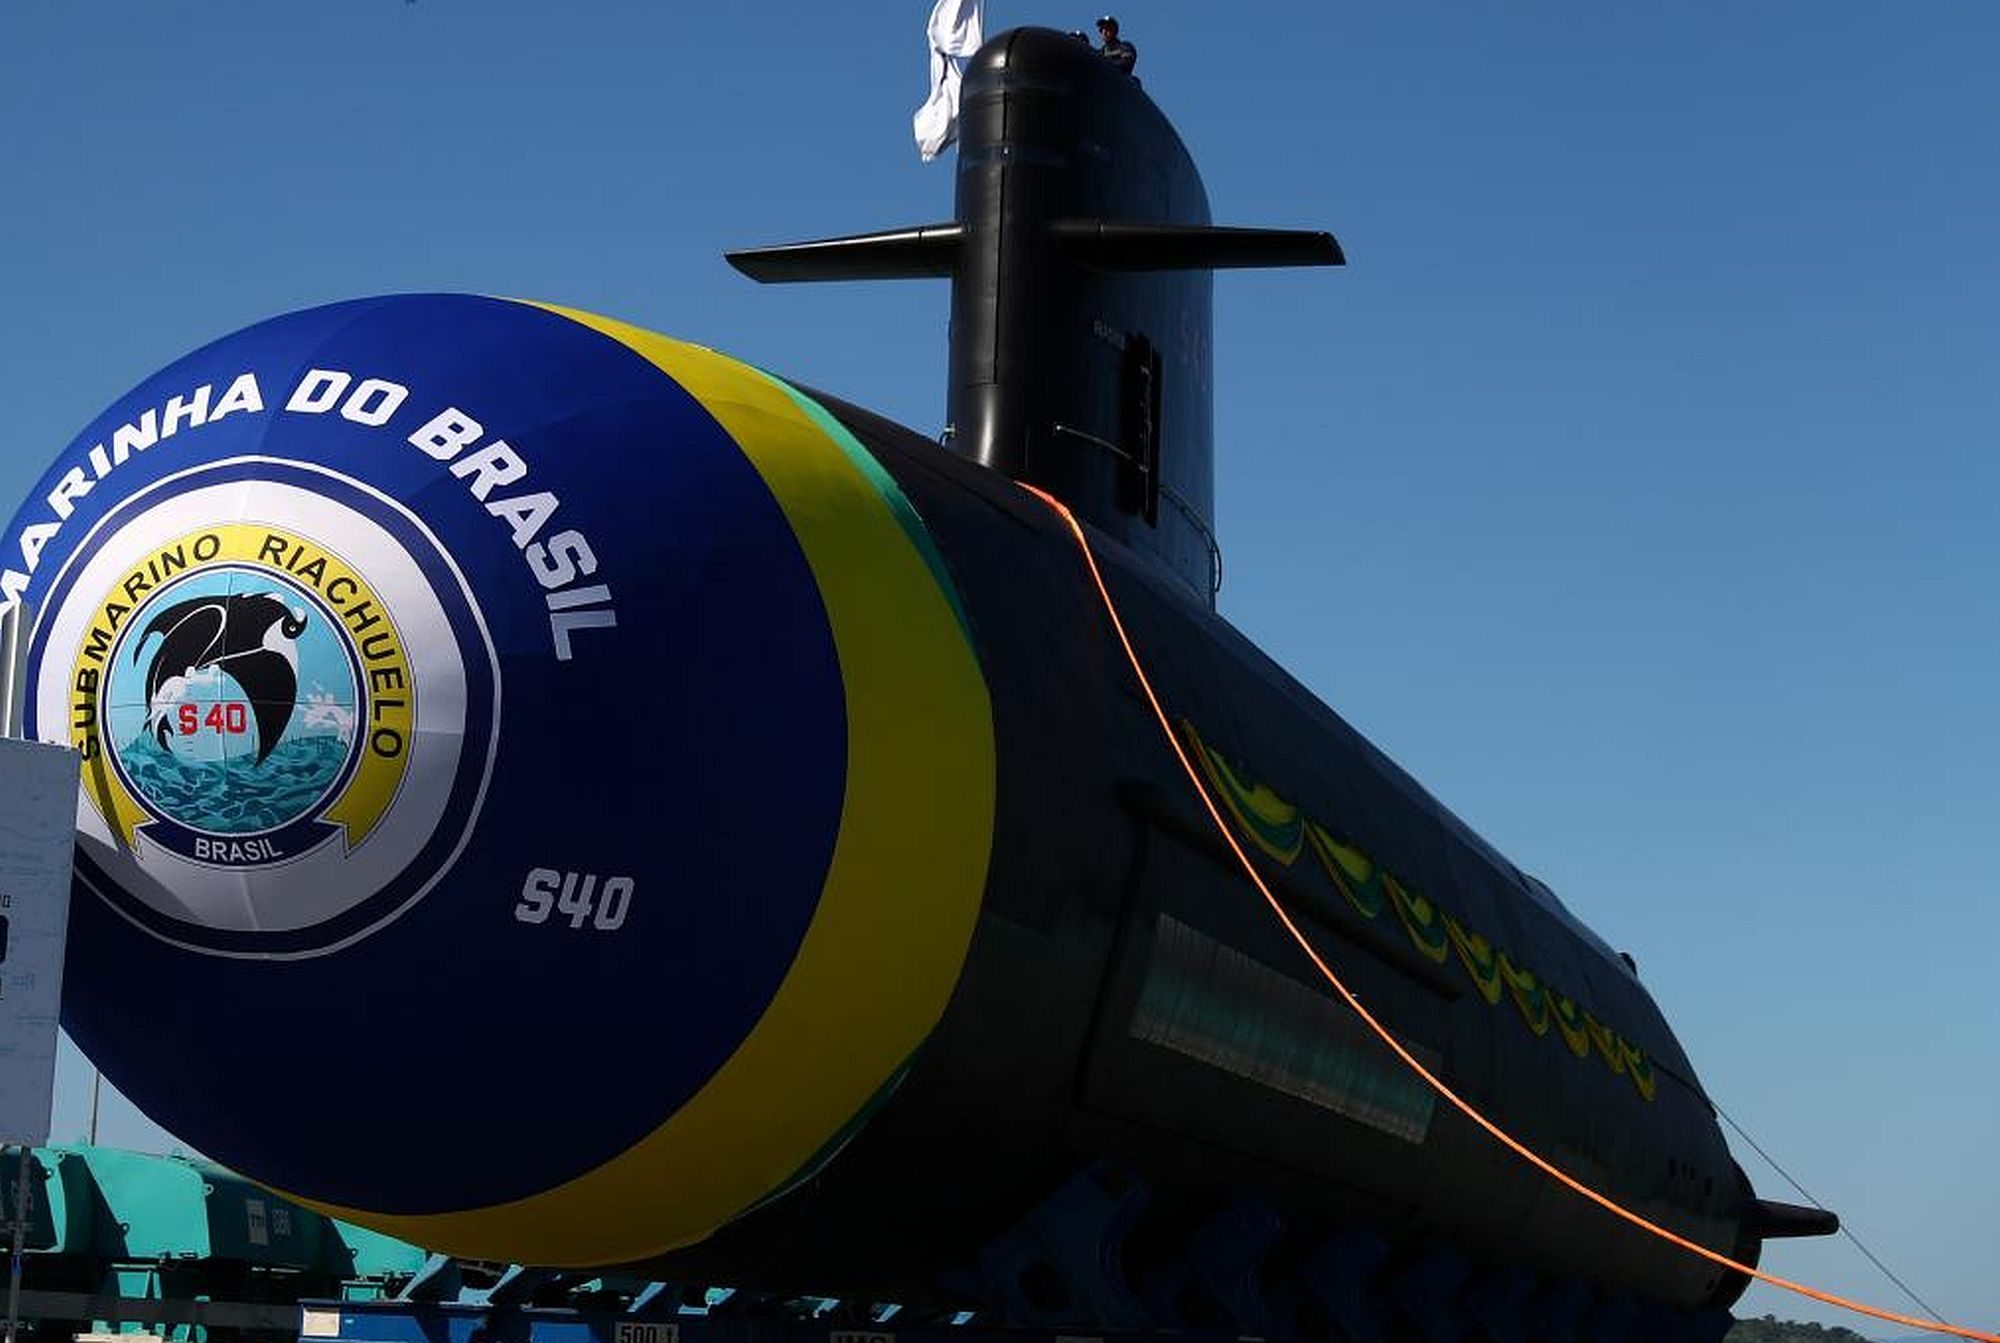 The Riachuelo is the first of four conventional submarines Brazil plans to launch.